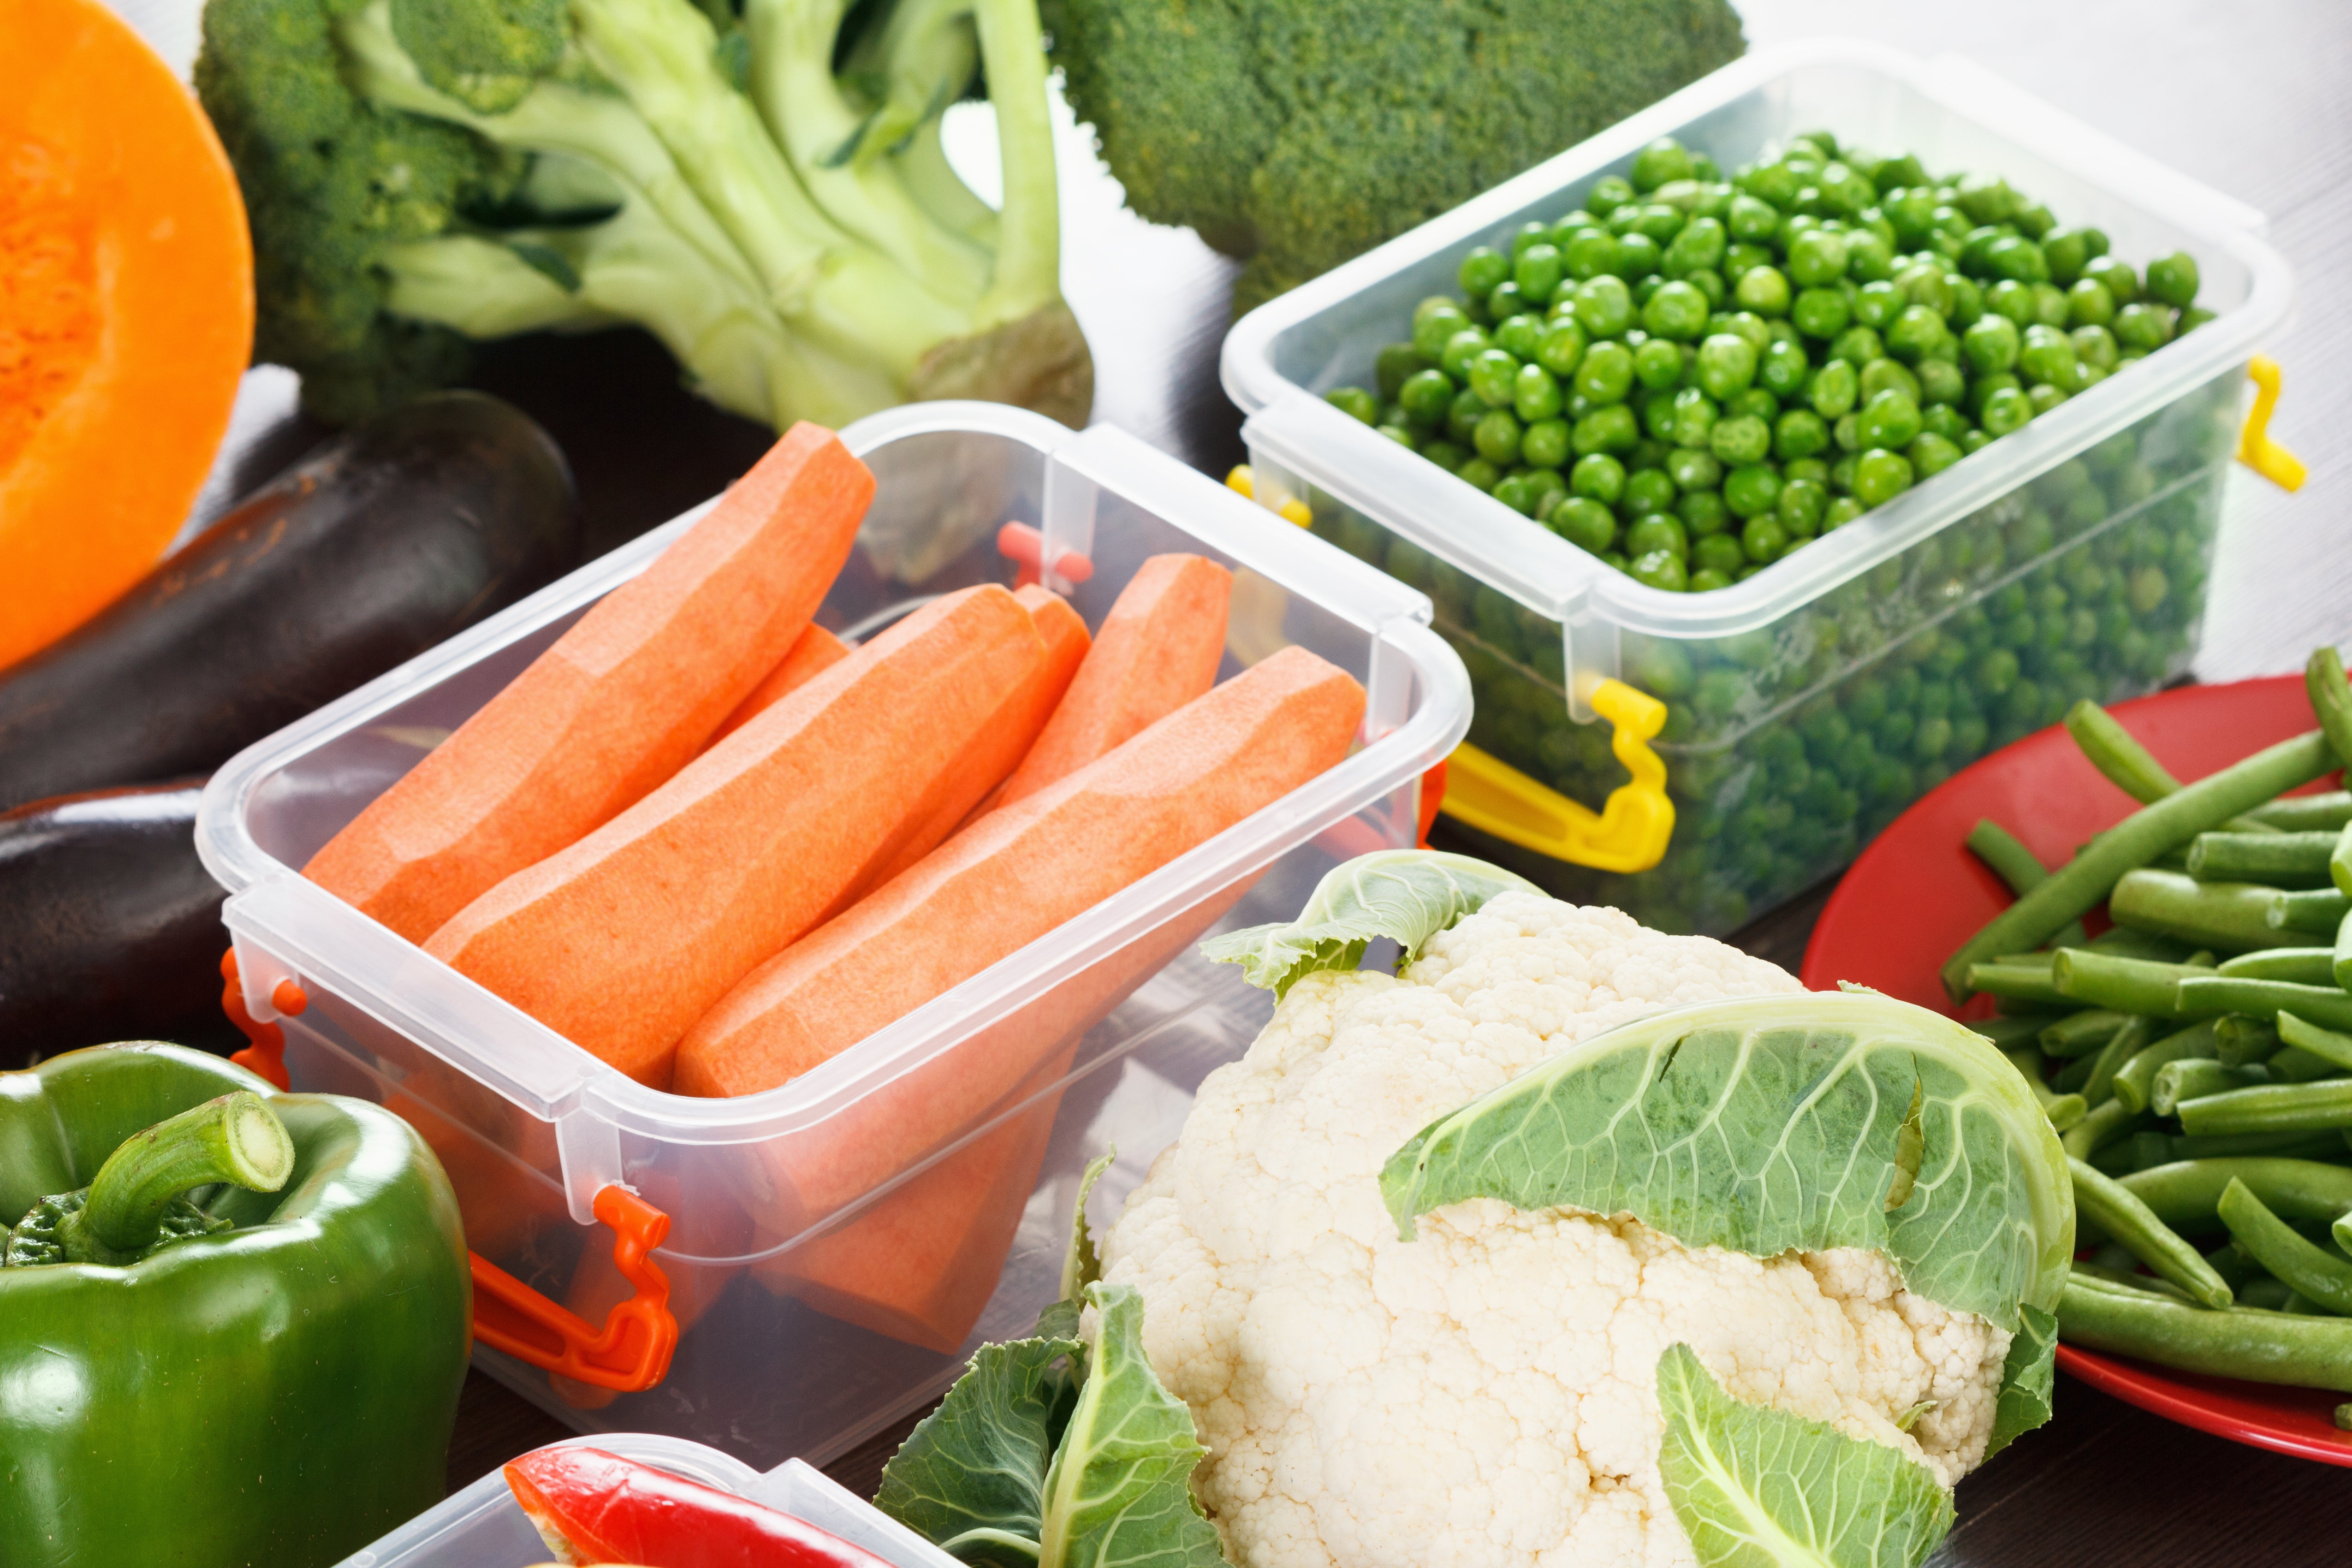 How To Reduce Food Waste: Smart Storage Tips